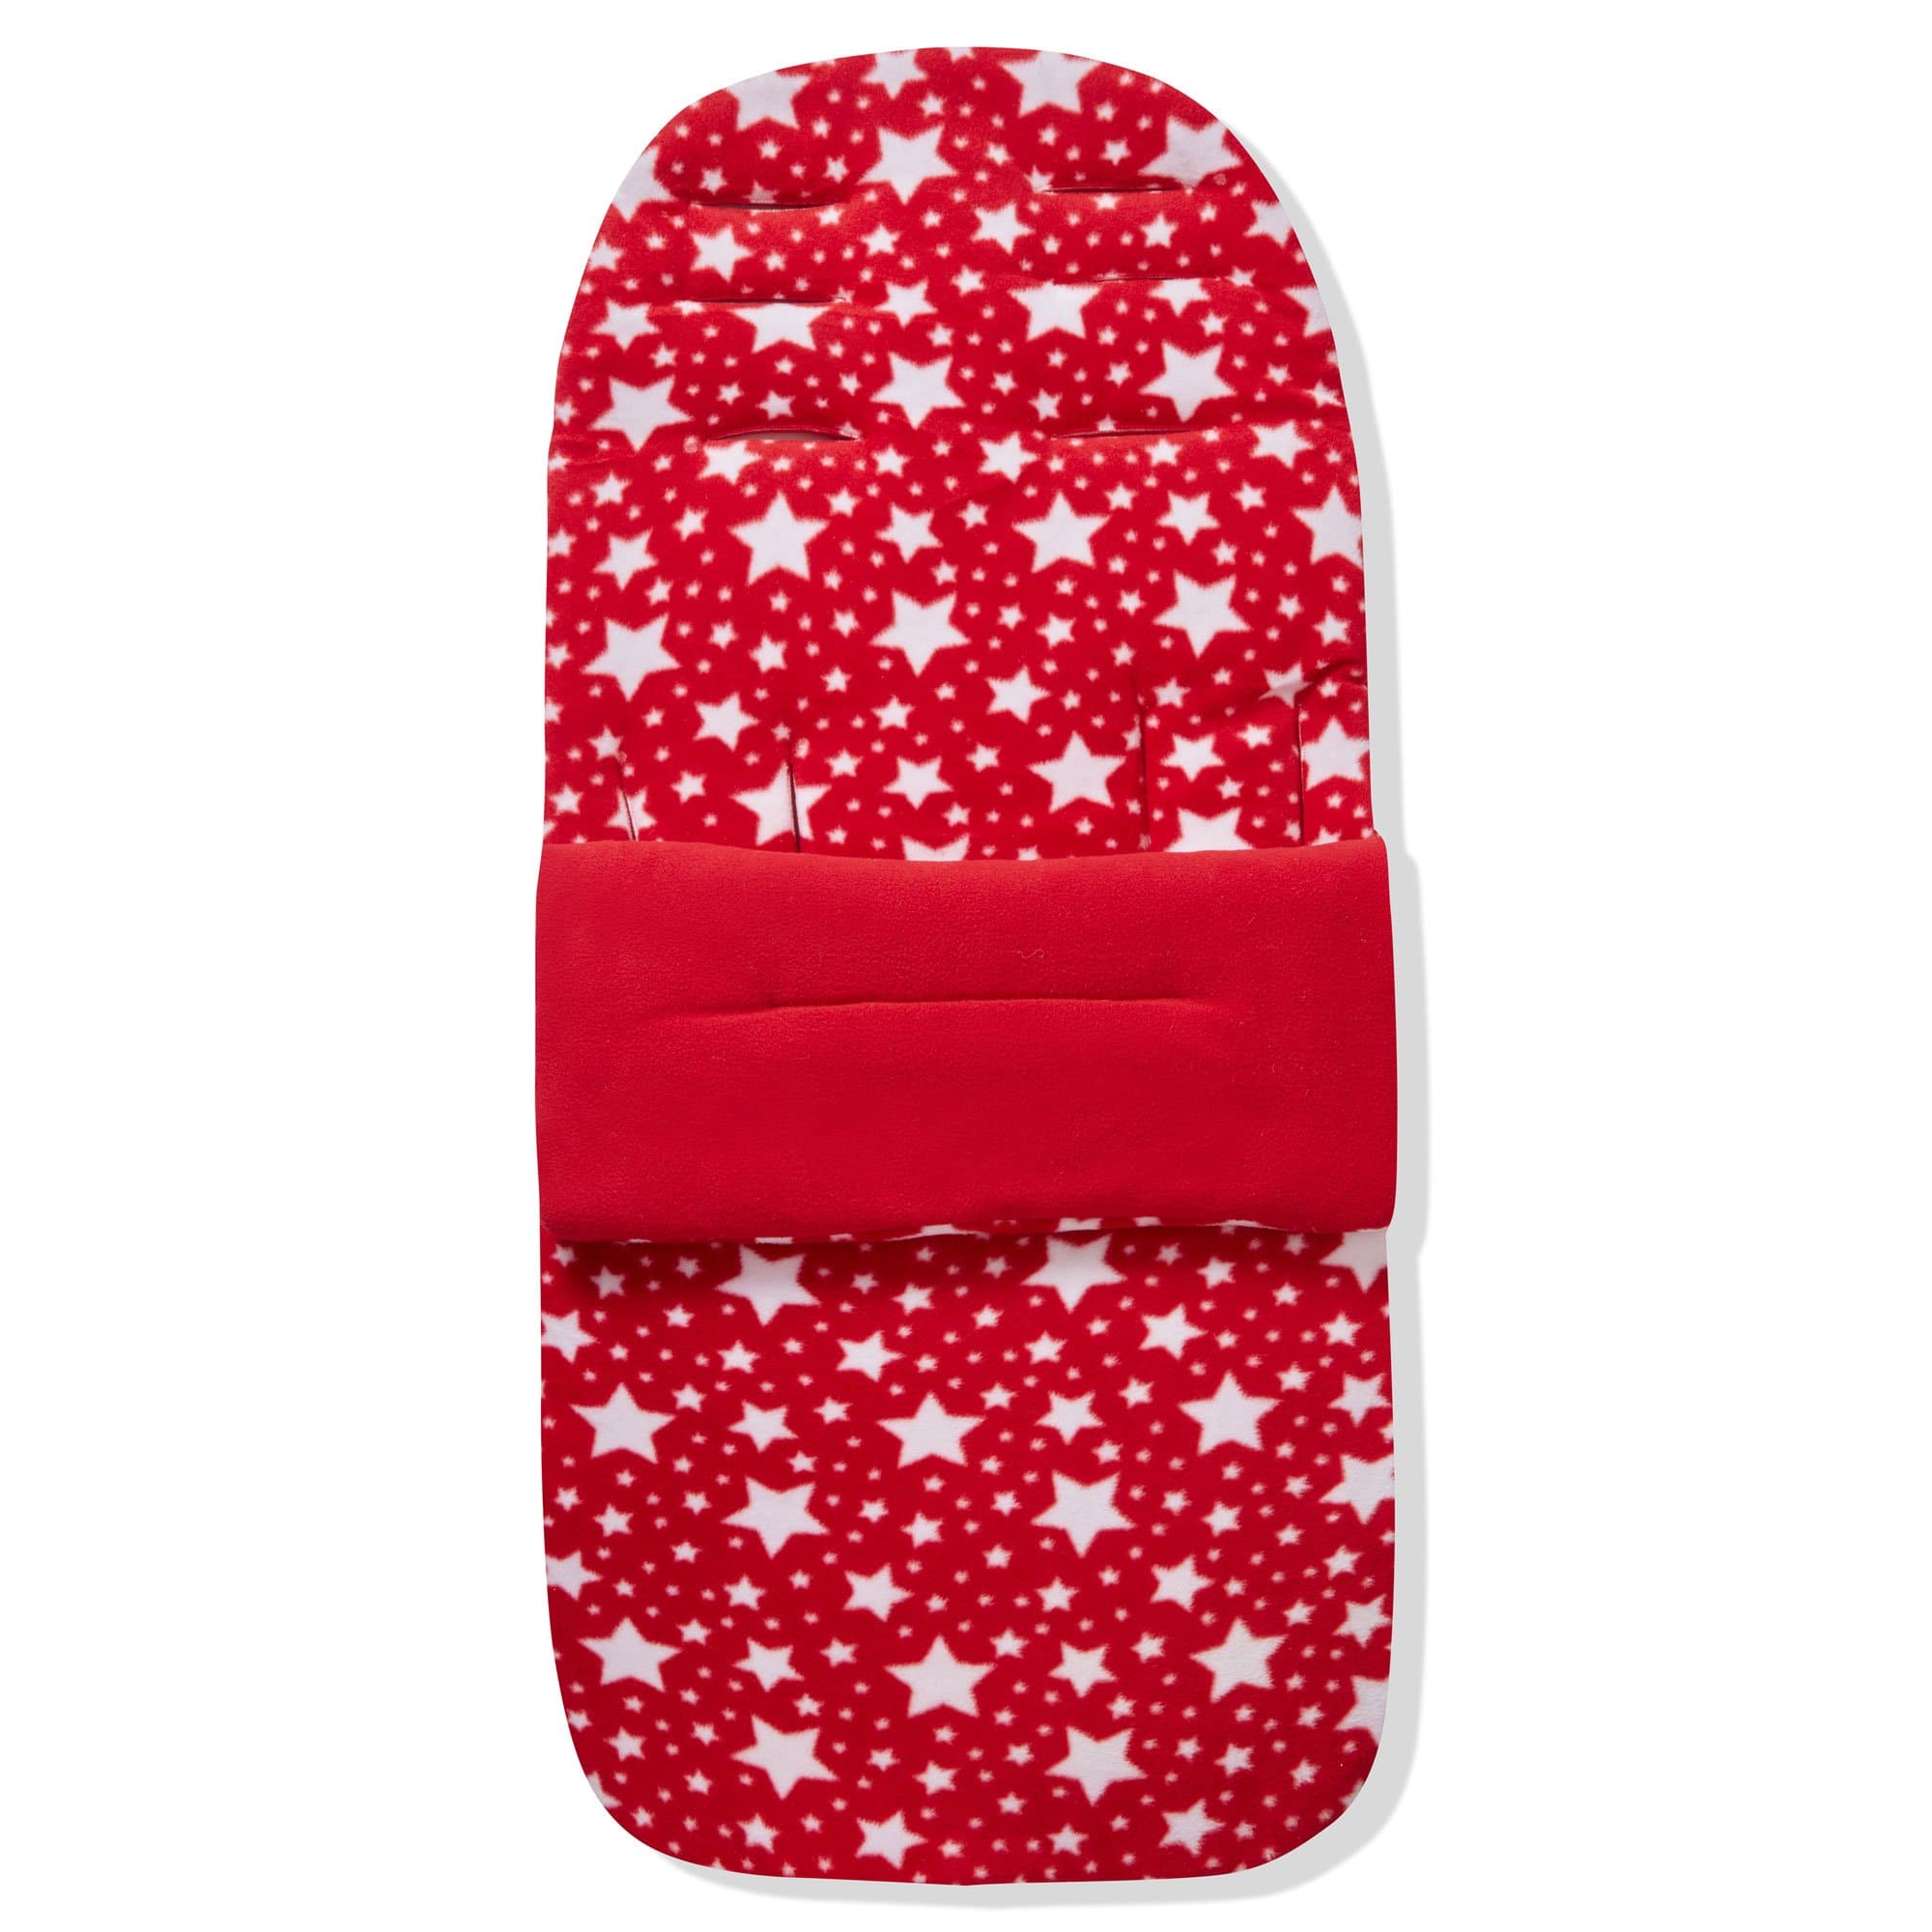 Fleece Footmuff / Cosy Toes Compatible with Hauck - For Your Little One